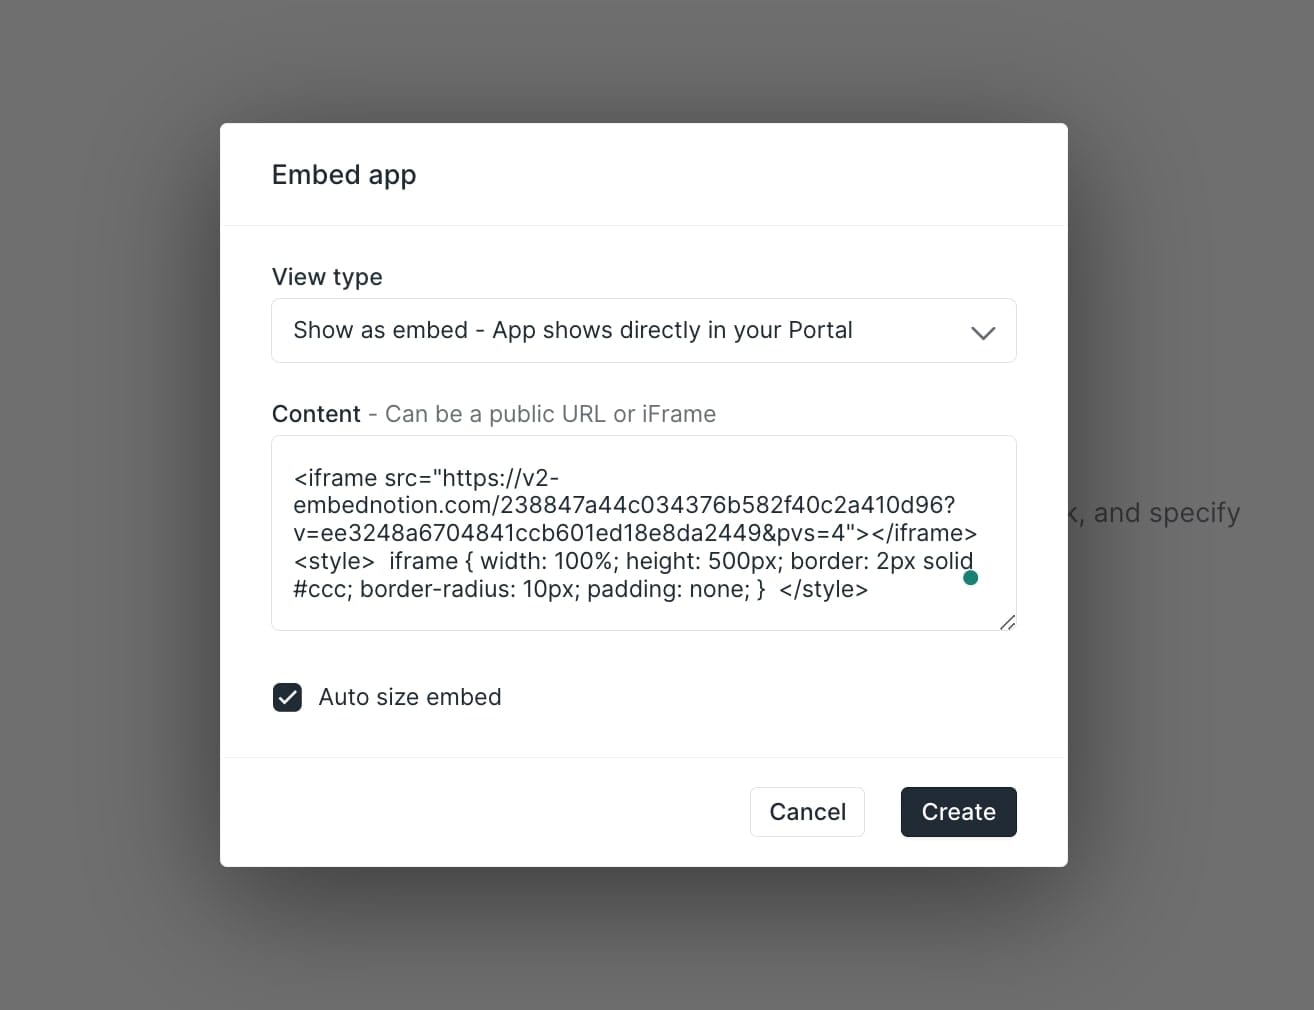 Pasting Notion embed code in Copilot